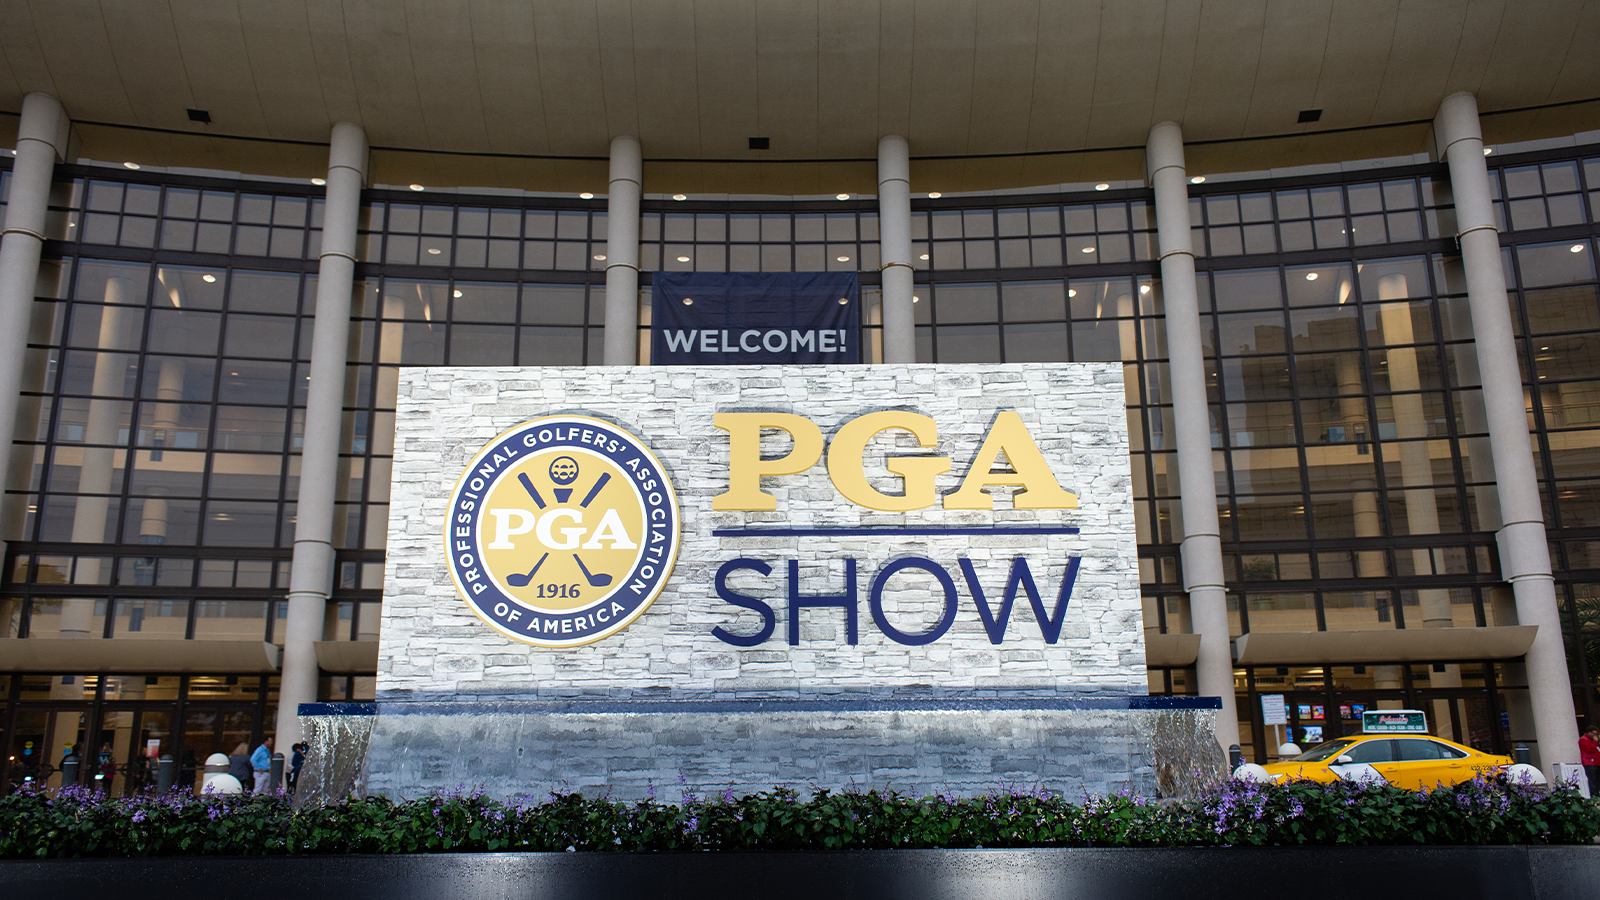 The PGA Show entrance during the 2022 PGA Show at the Orange County Convention Center on January 26, 2022 in Orlando, FL. (Photo by Montana Pritchard/PGA of America)